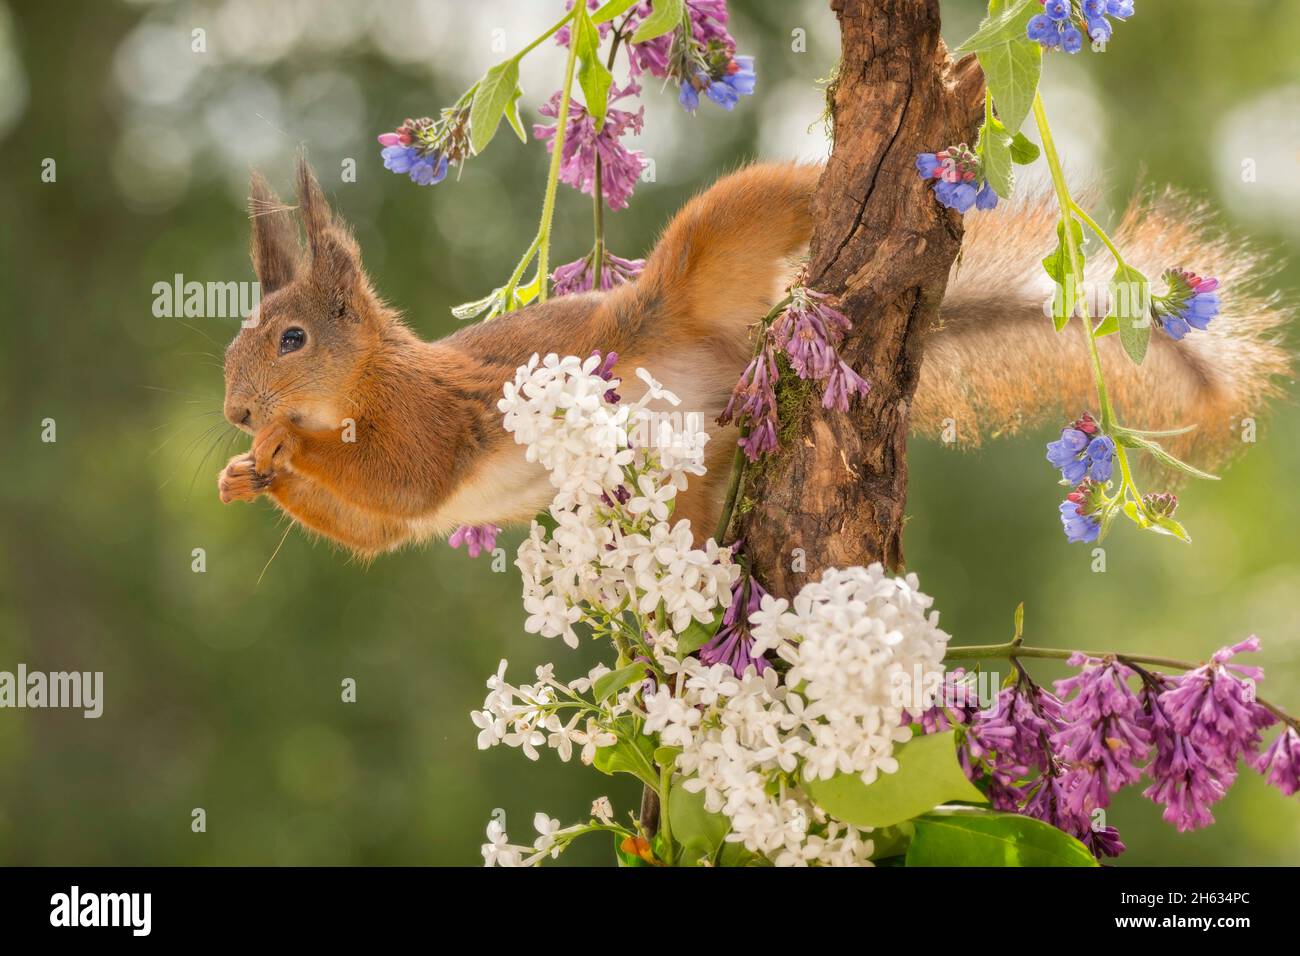 close up of head of red squirrel standing between flowers on tree trunk Stock Photo